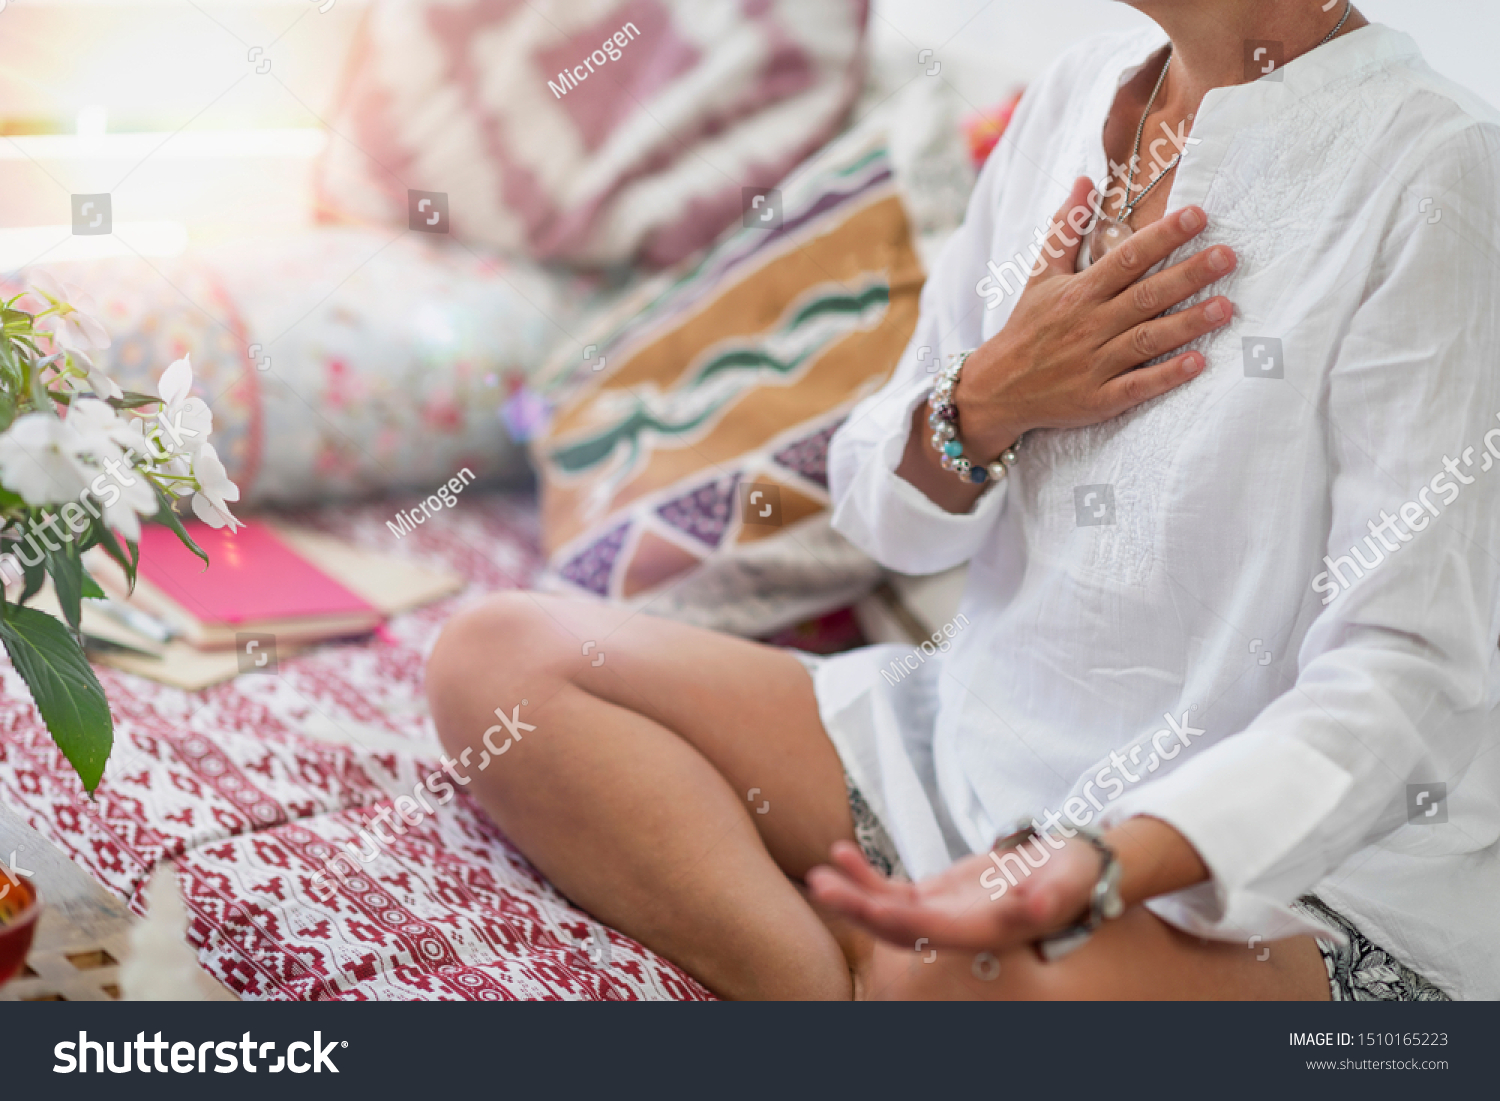 Self-Healing Heart Chakra Meditation. Woman sitting in a lotus position with right hand on heart chakra and left palm open in a receiving gesture. Self-Care Practice at Home #1510165223